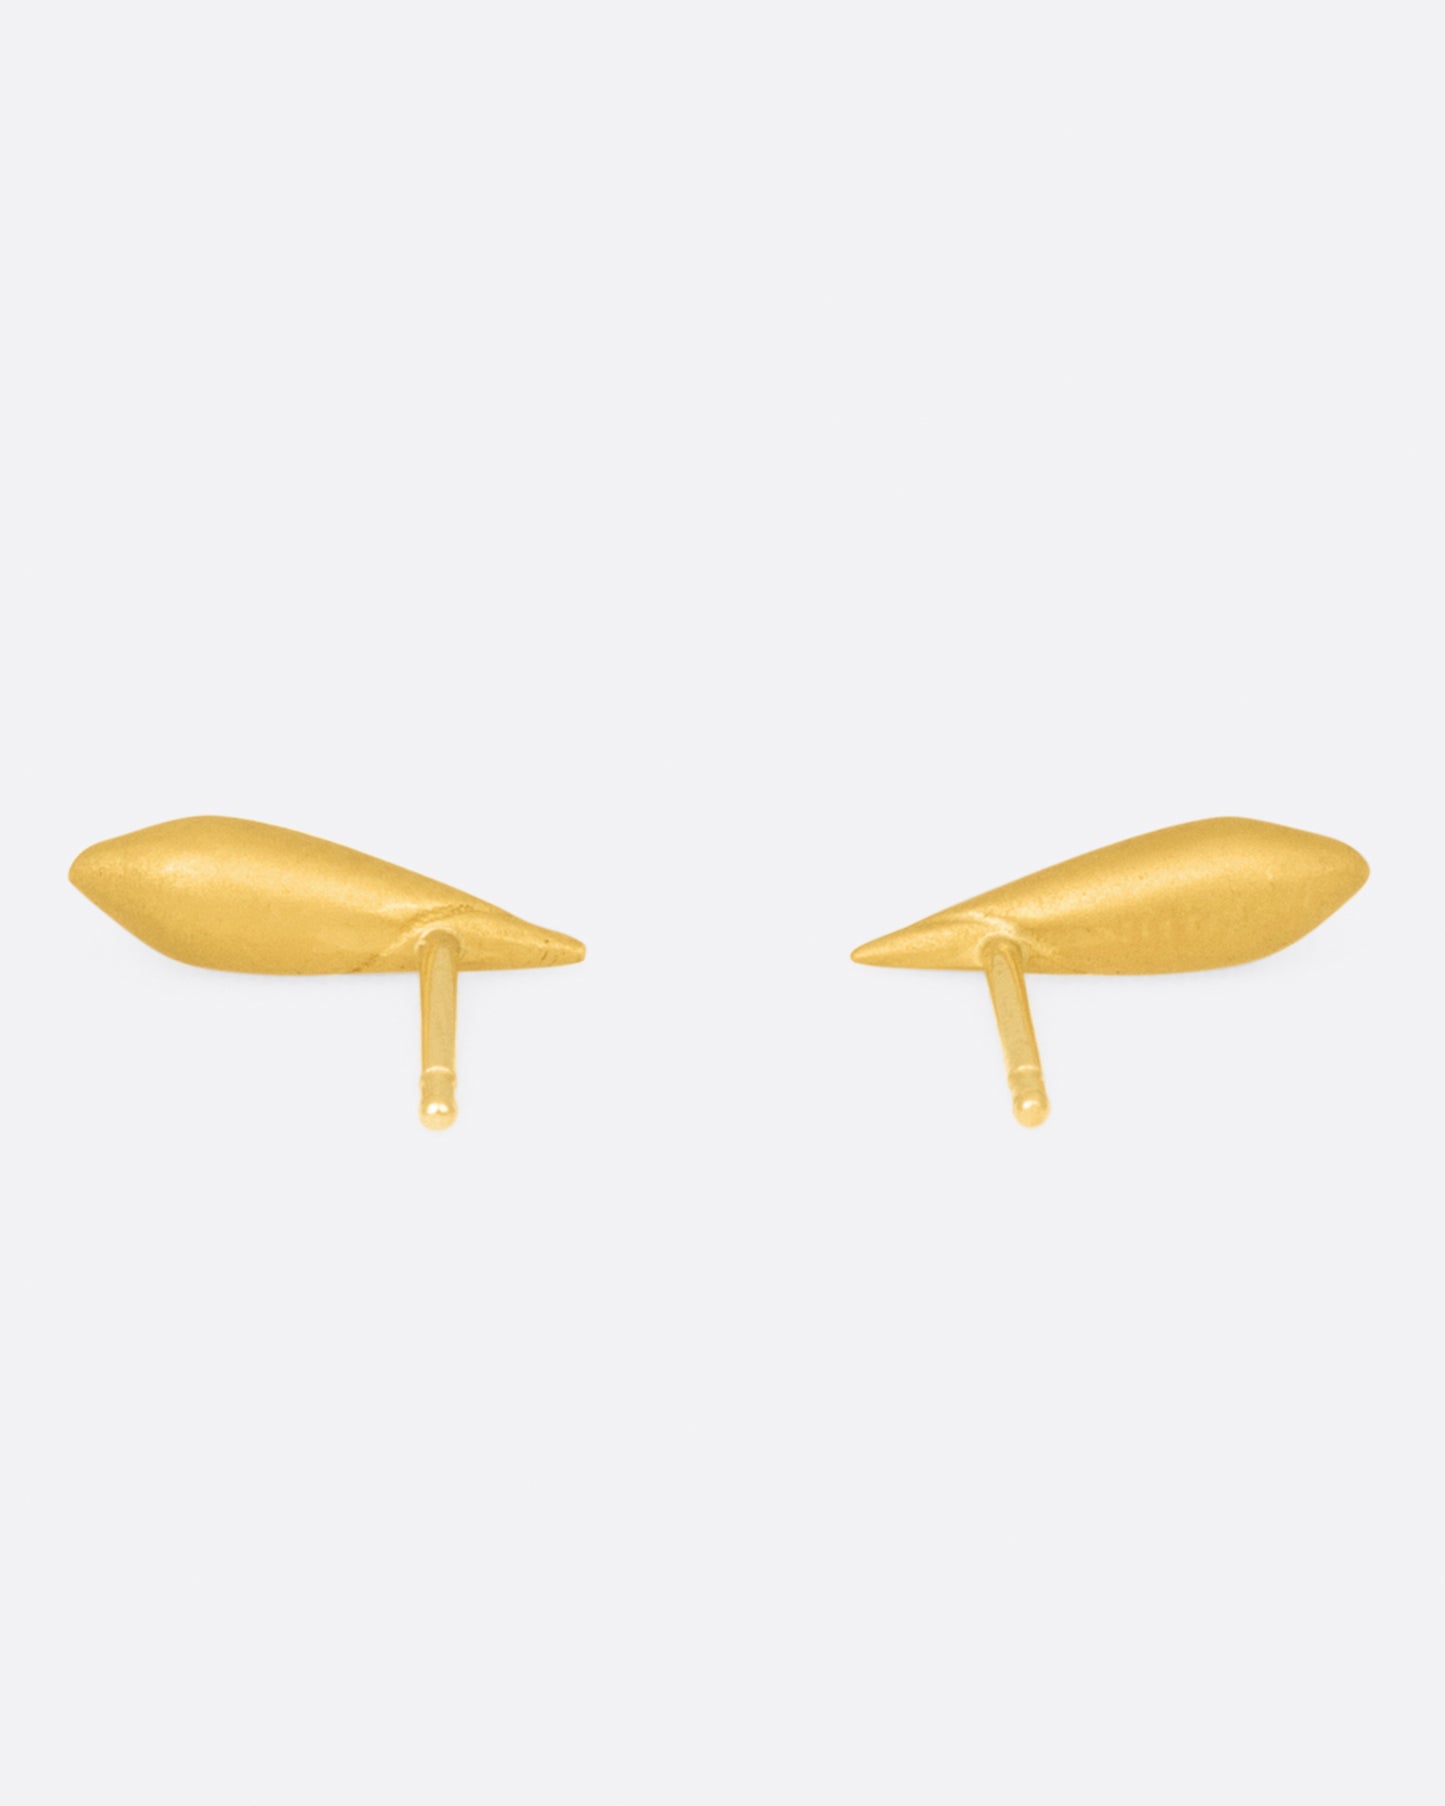 A pair cone shaped 22k yellow gold stud earring with a line following the curve of the earrings, shown from the back.